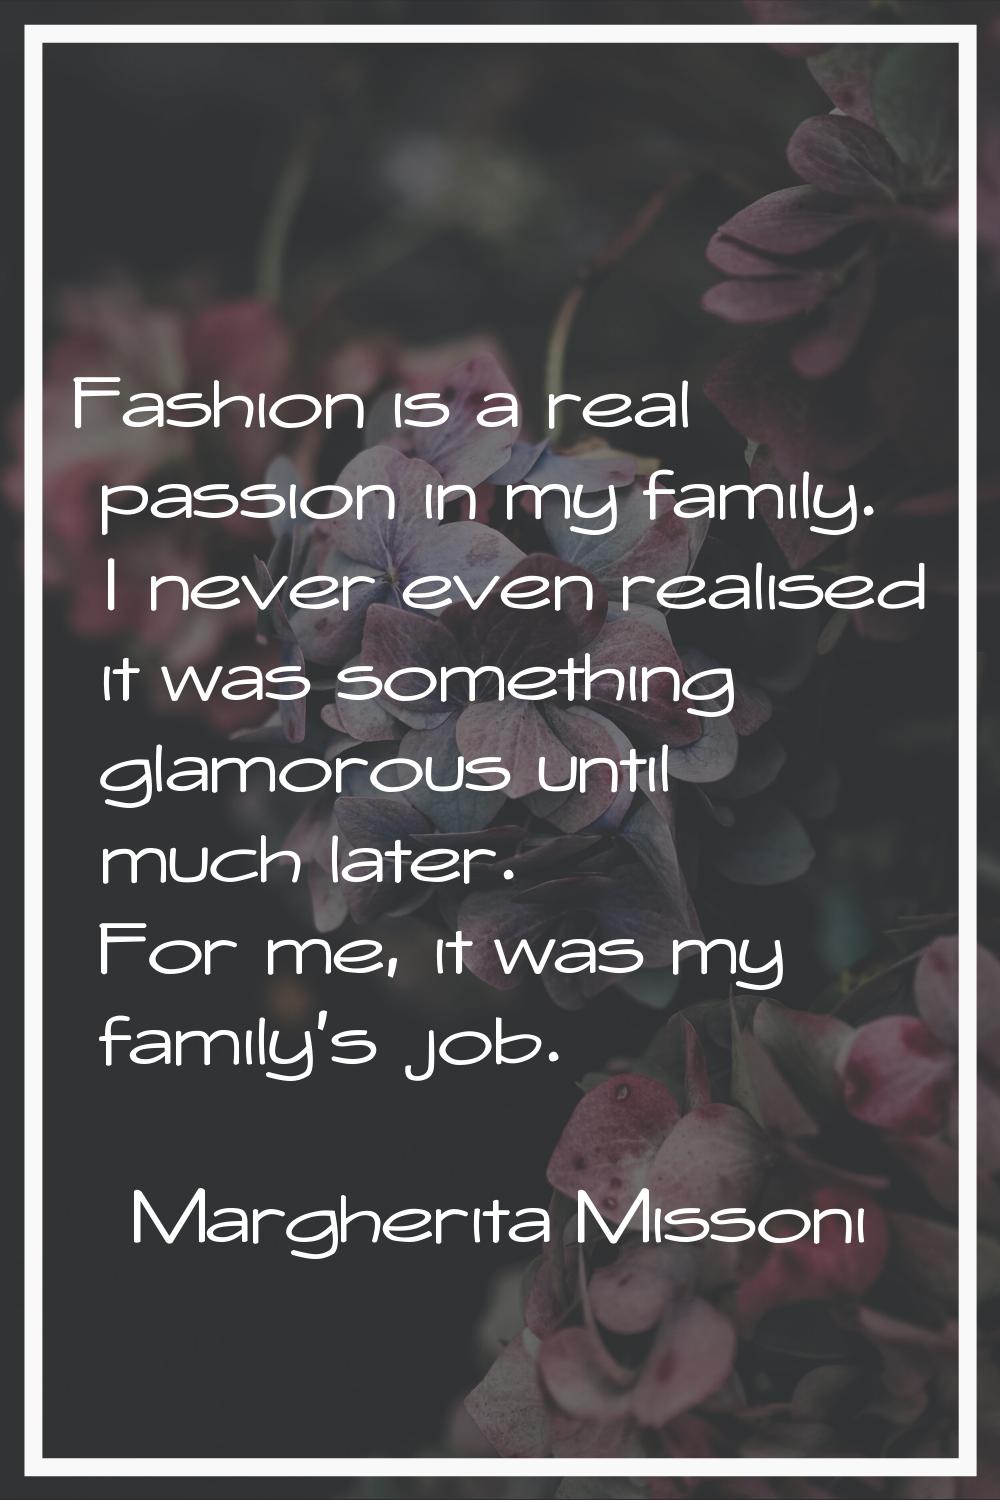 Fashion is a real passion in my family. I never even realised it was something glamorous until much